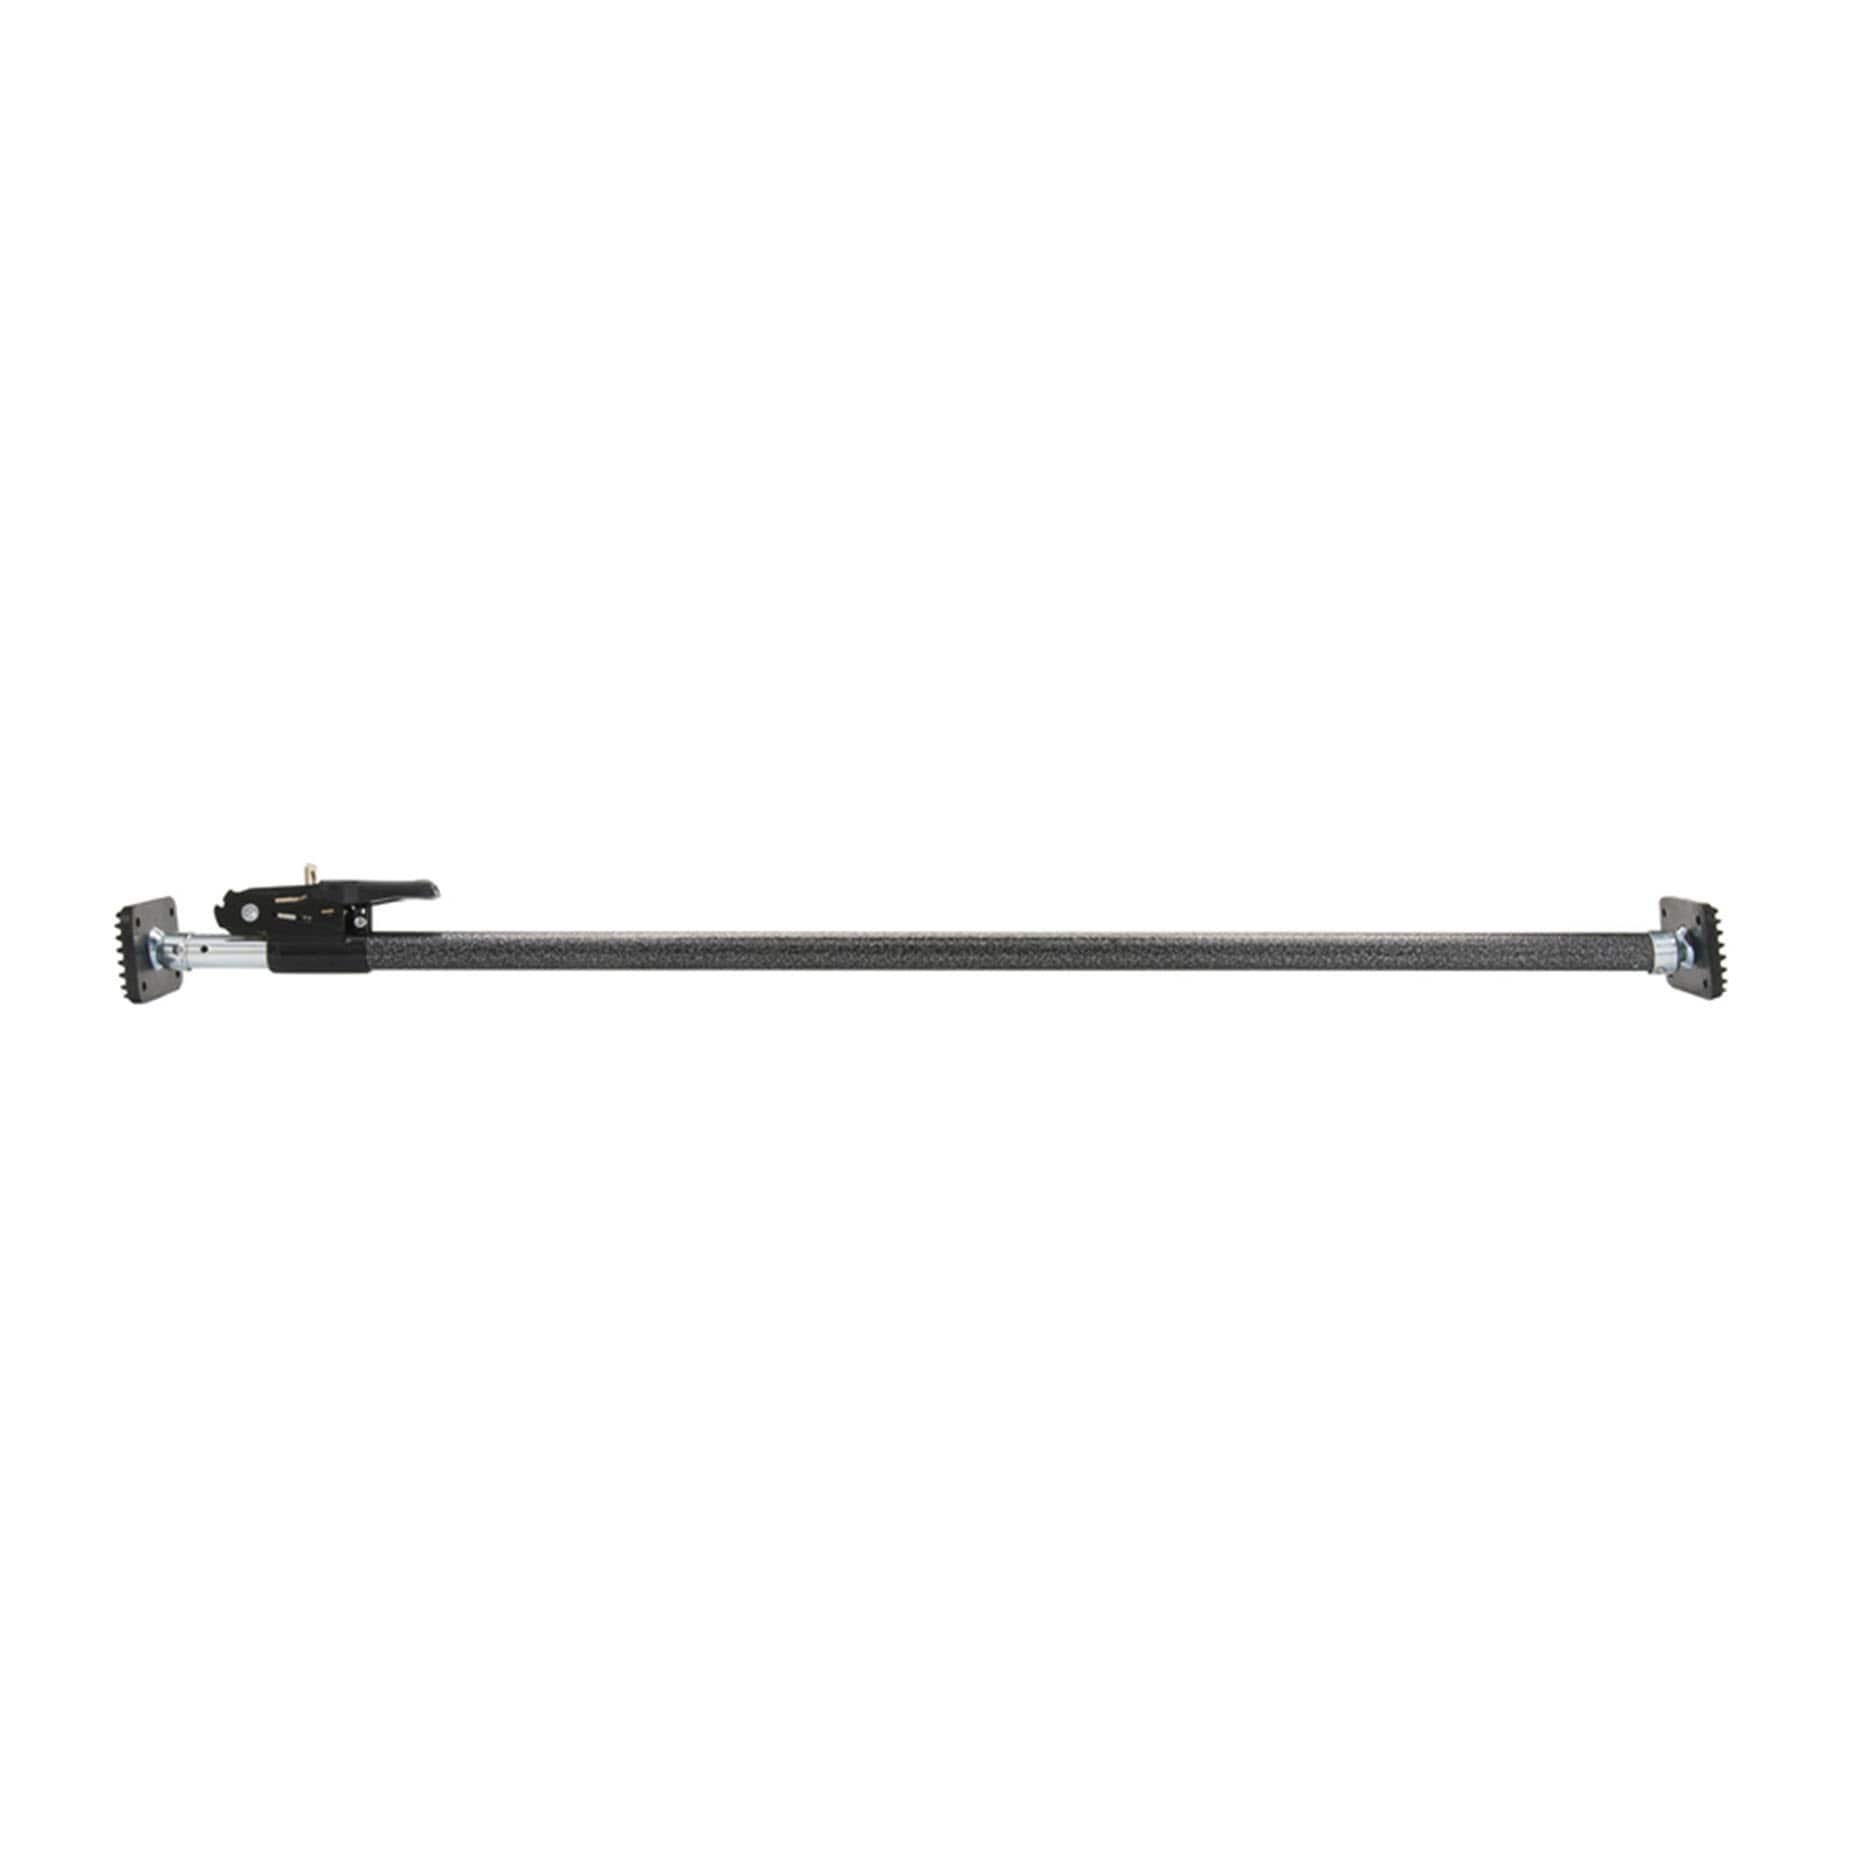 Reese Ratcheting Cargo Bar Load Bar Adjustable 40 to 70 Inches Truck Bed Cargo